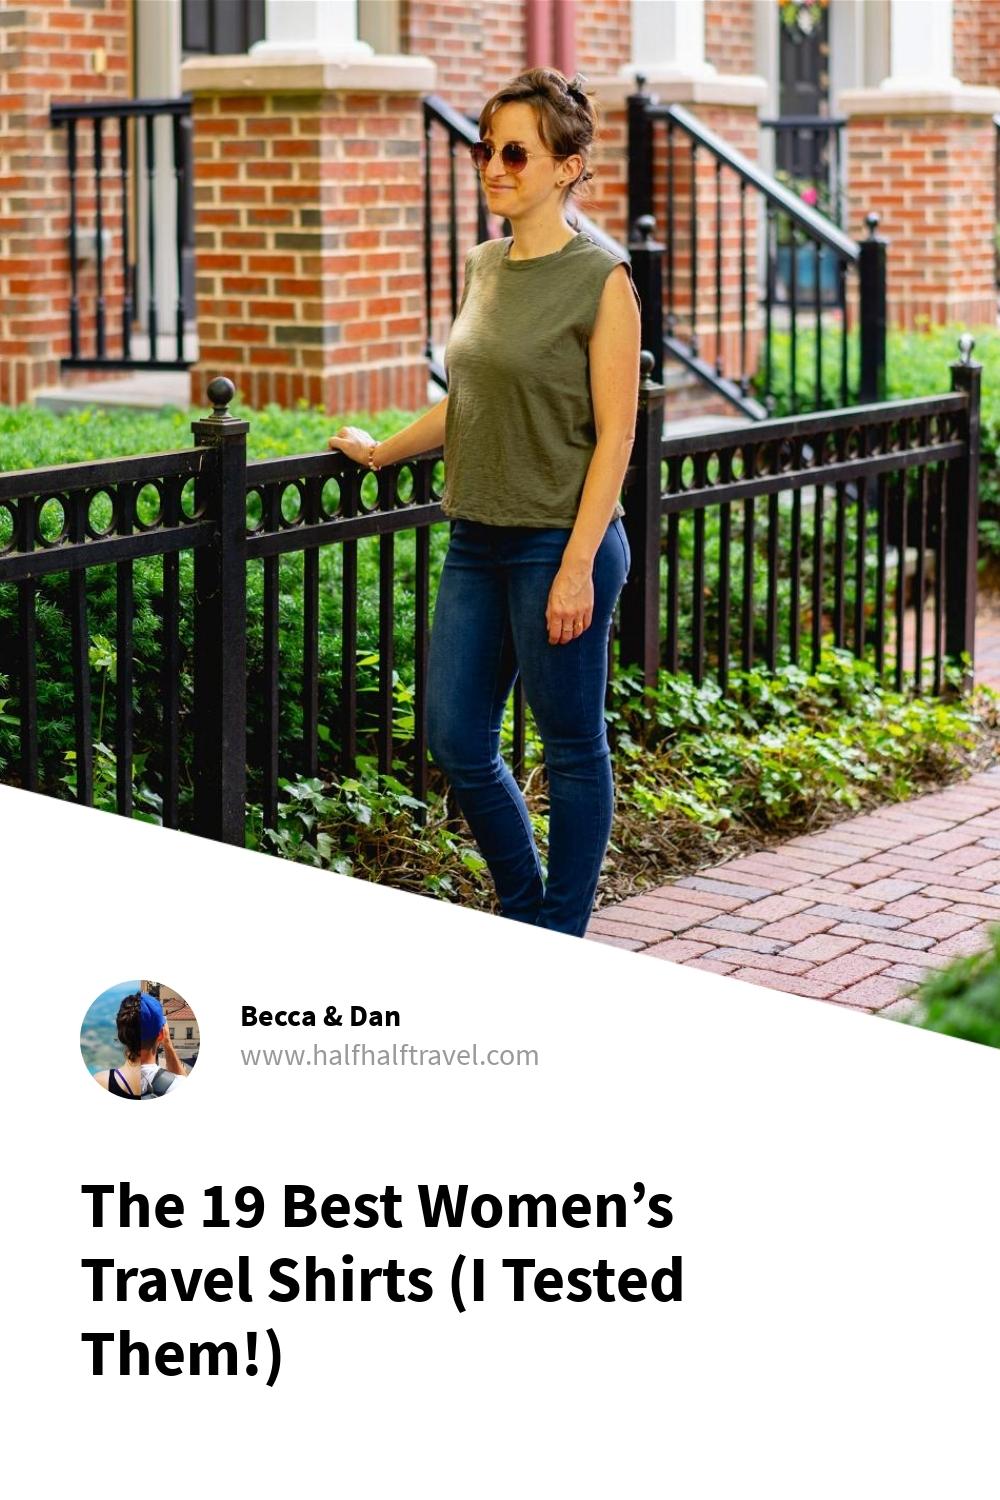 Pinterest image from the 'The 19 Best Women’s Travel Shirts (I tested them!)' article on Half Half Travel